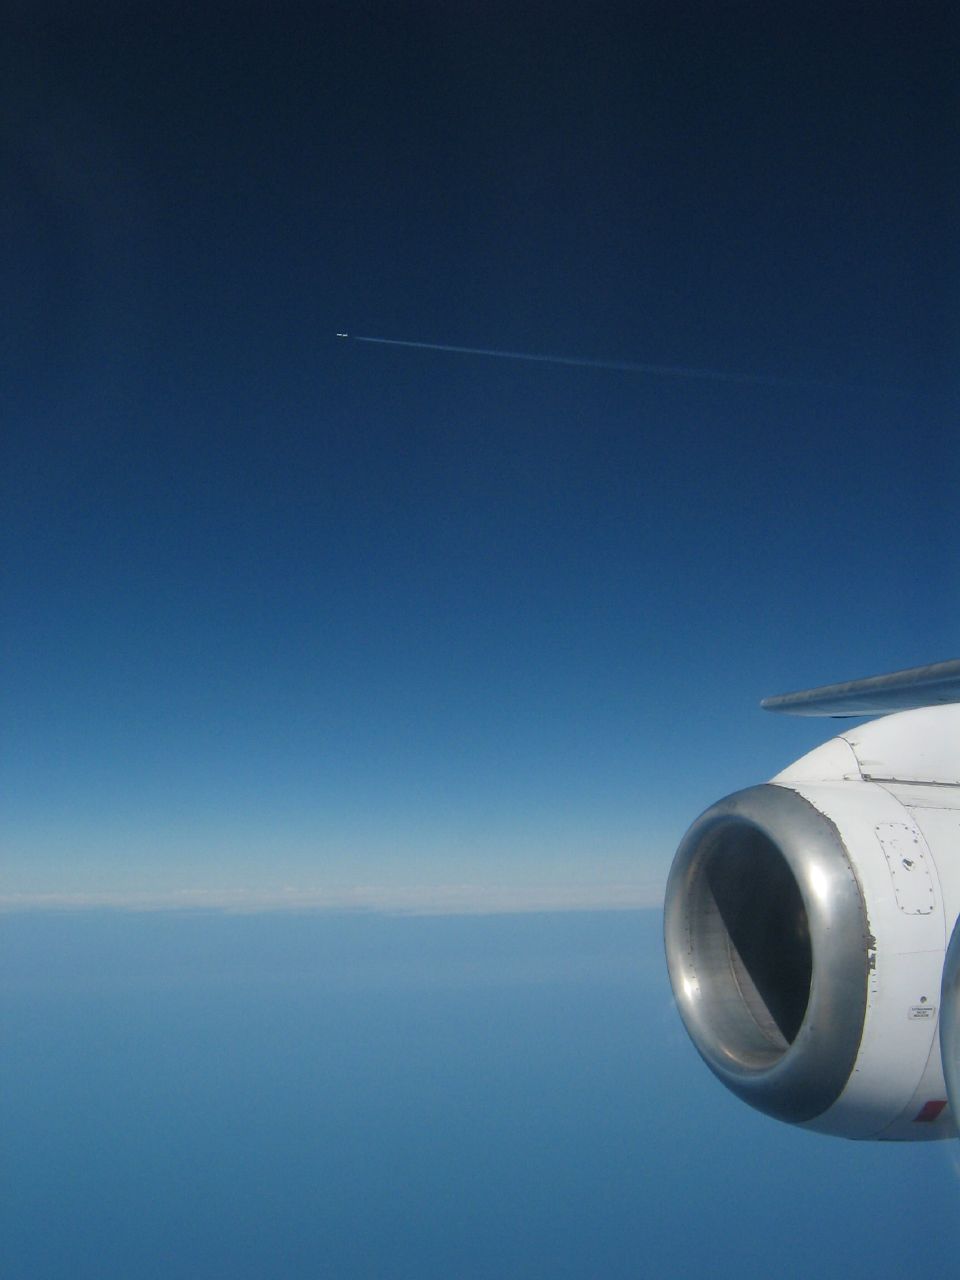 a plane wing flying over the ocean and a blue sky